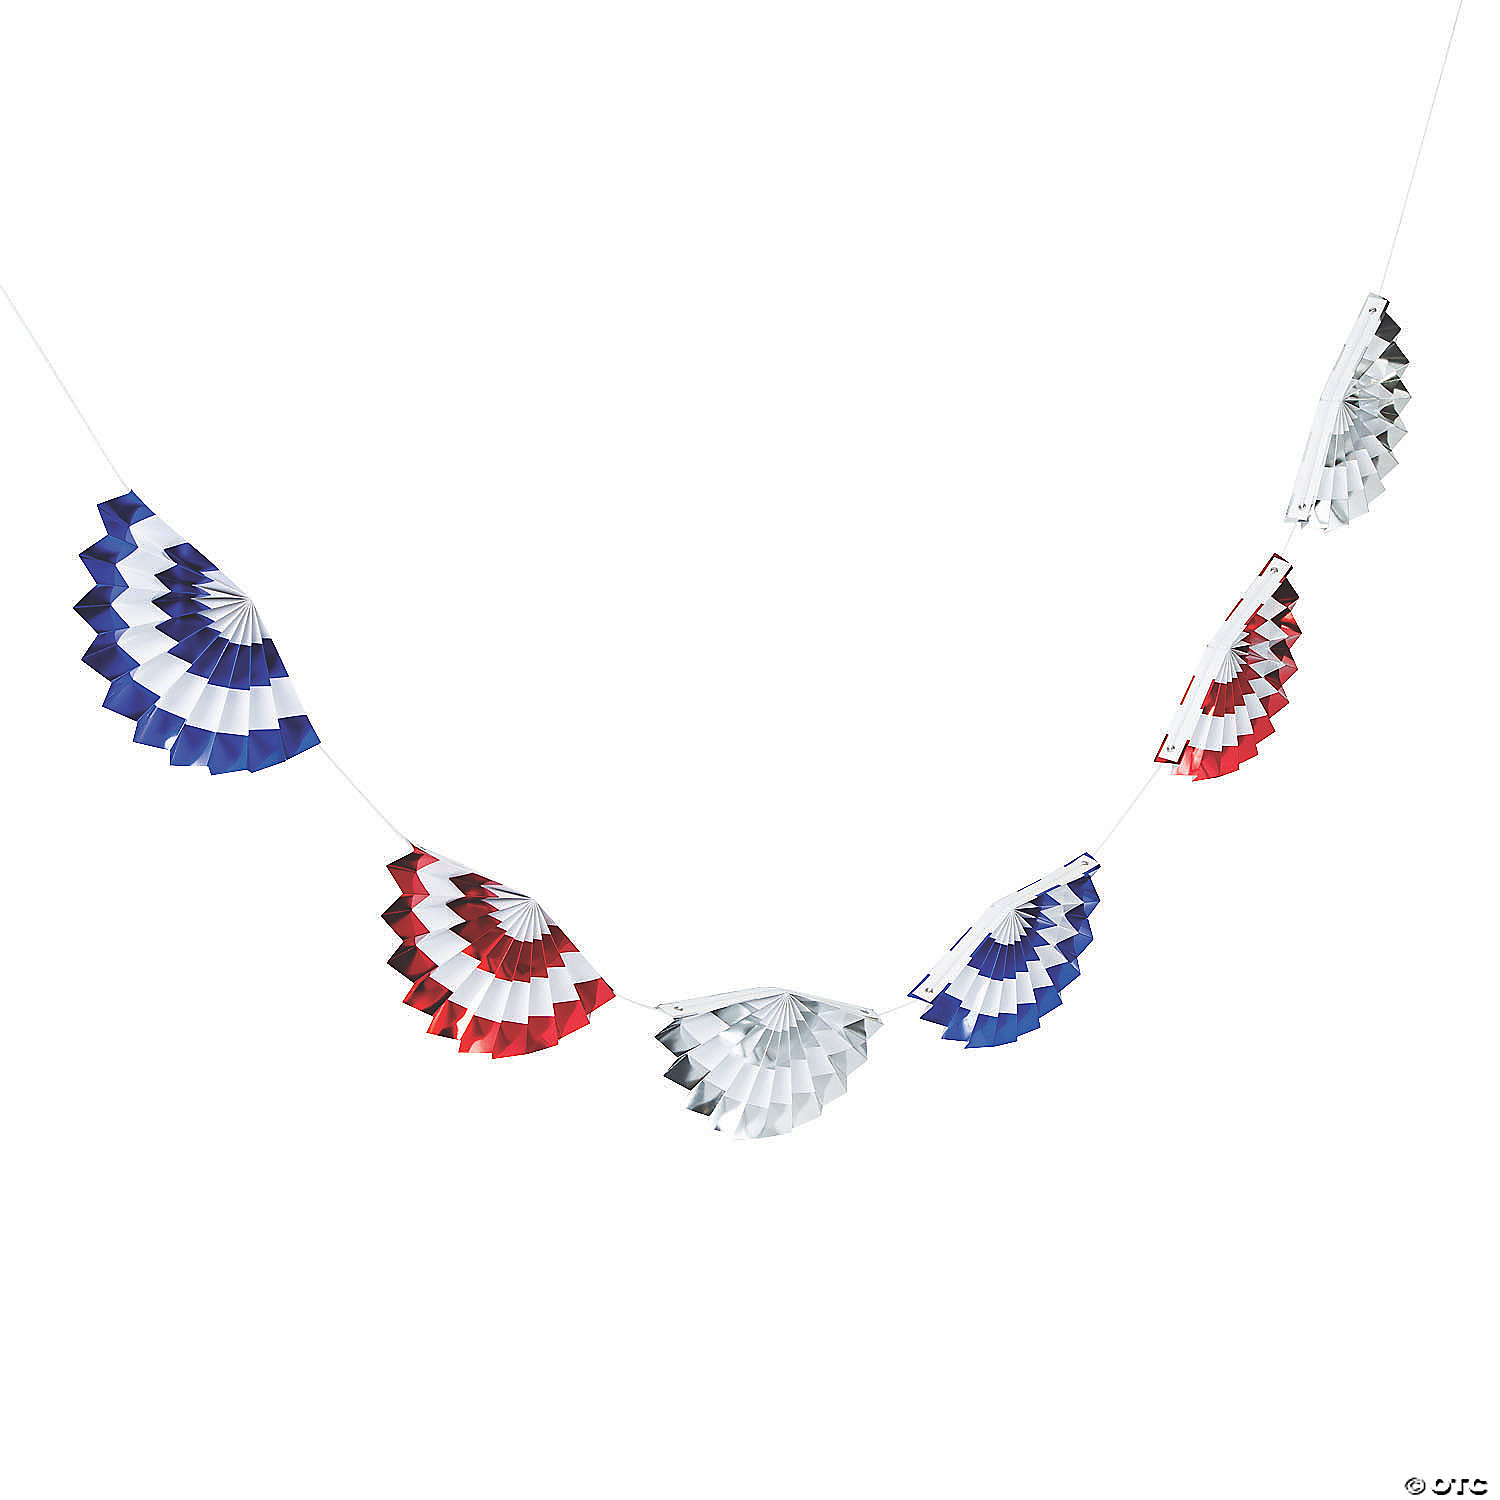 RED WHITE & BLUE SHINY GARLAN DECORATIONS SET SUMMER PATRIOTIC 4TH OF JULY 